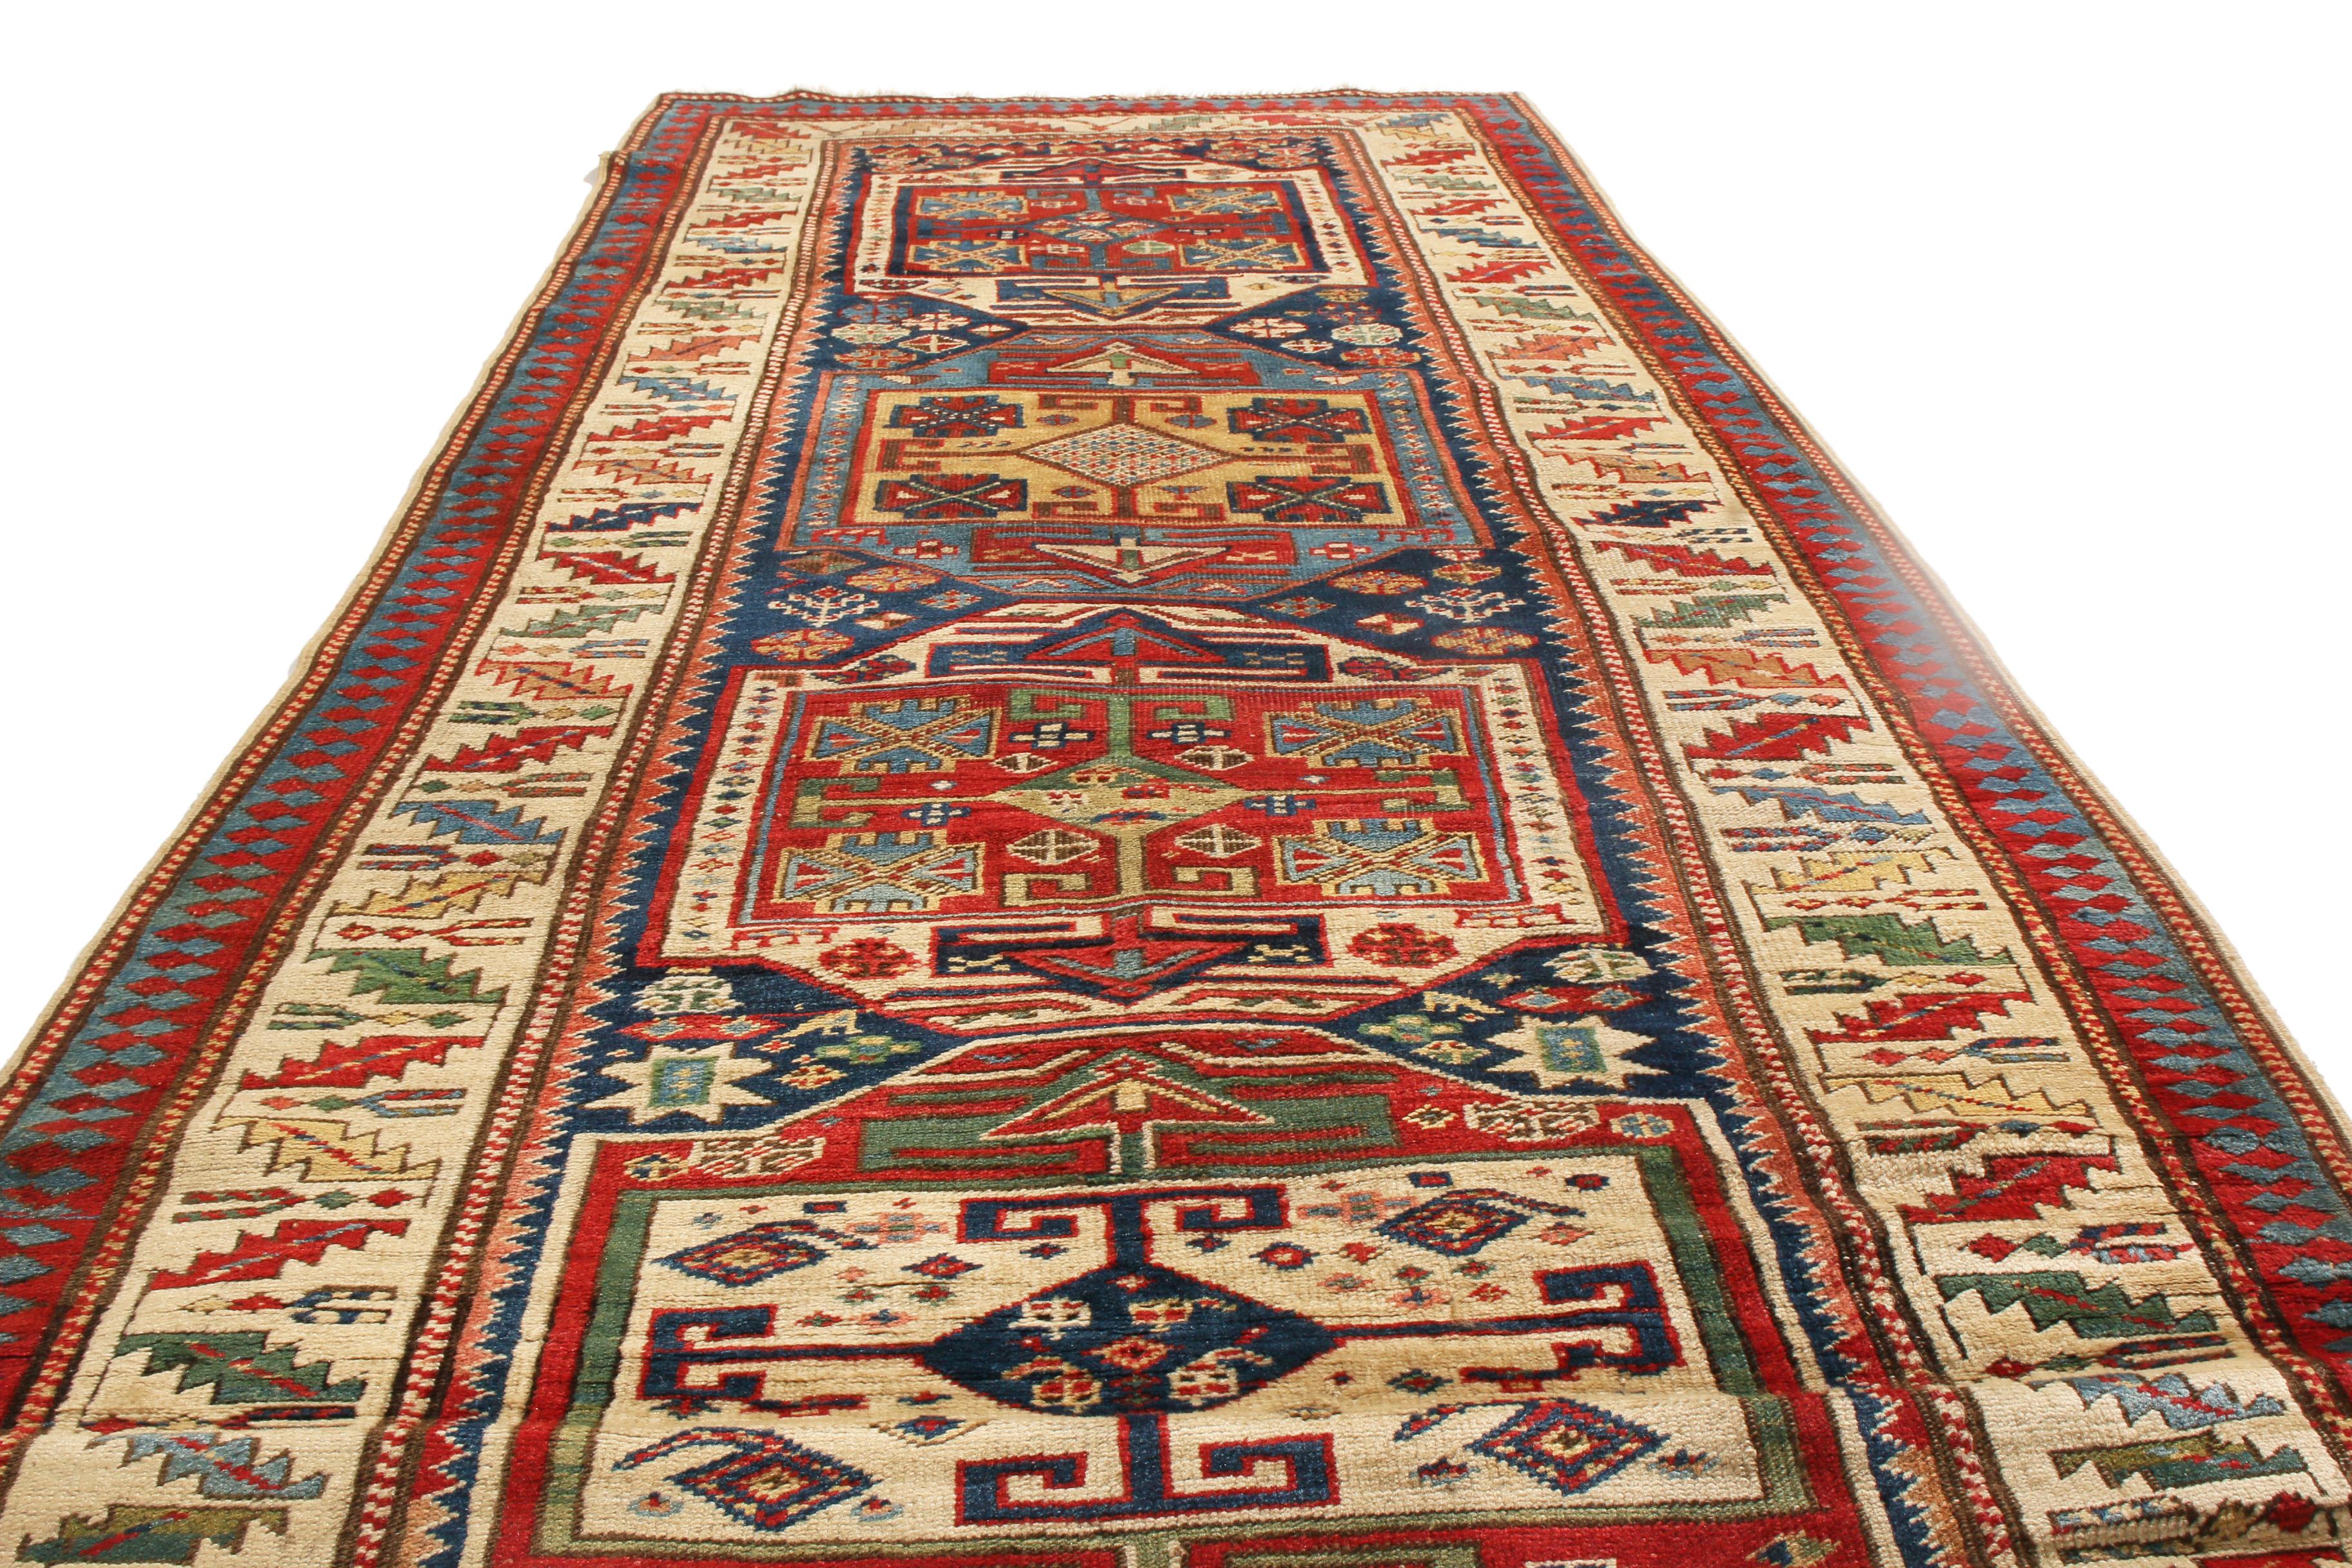 Hand knotted in high quality wool and originating from Russia in 1880, this antique Kazak runner hosts a unique all over field design with many variations of the ram’s horn and dowry chest symbols. Complemented by celebratory tribal ocean and abrash